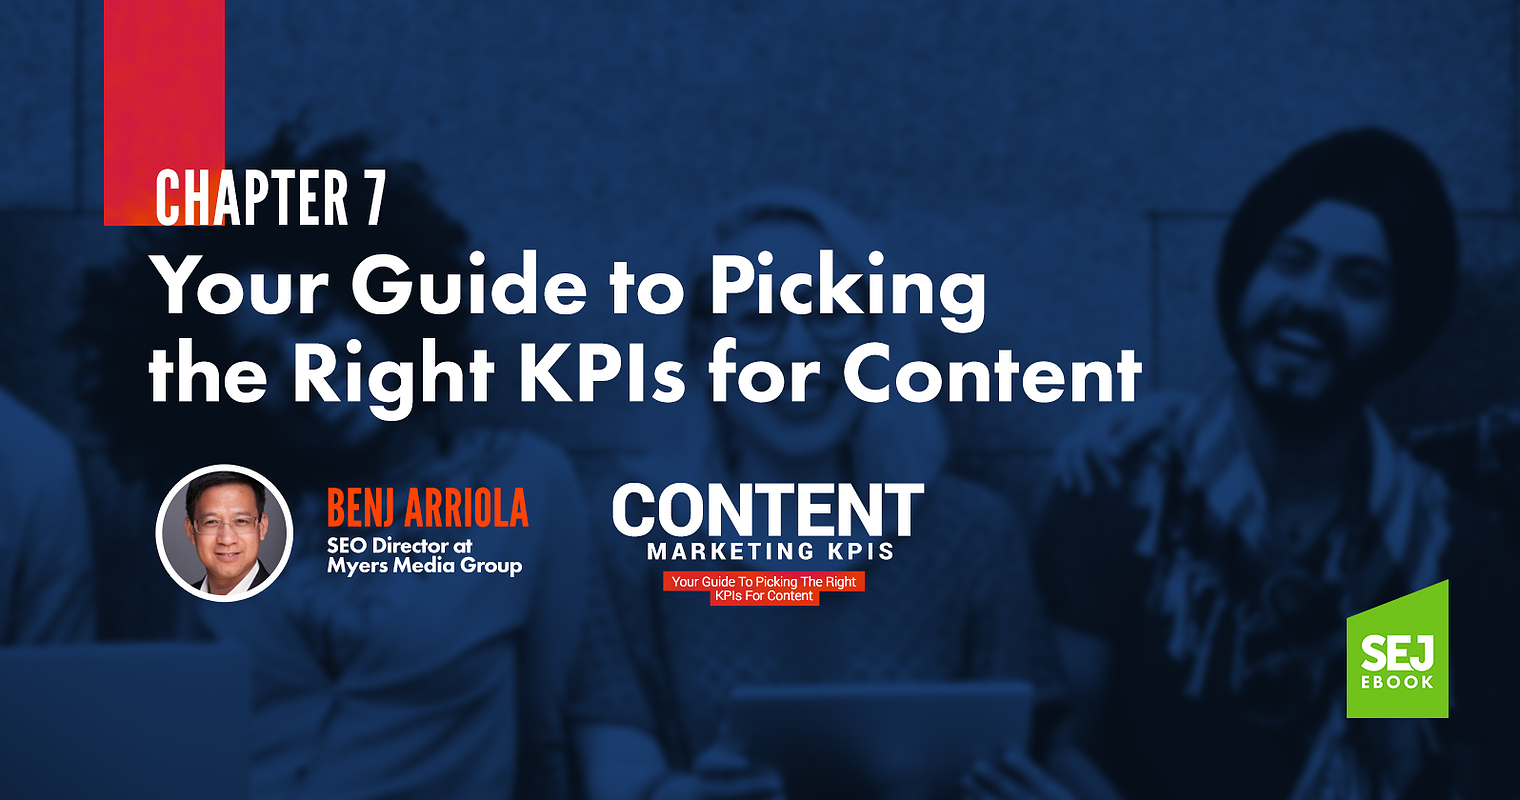 Your Guide to Picking the Right KPIs for Content